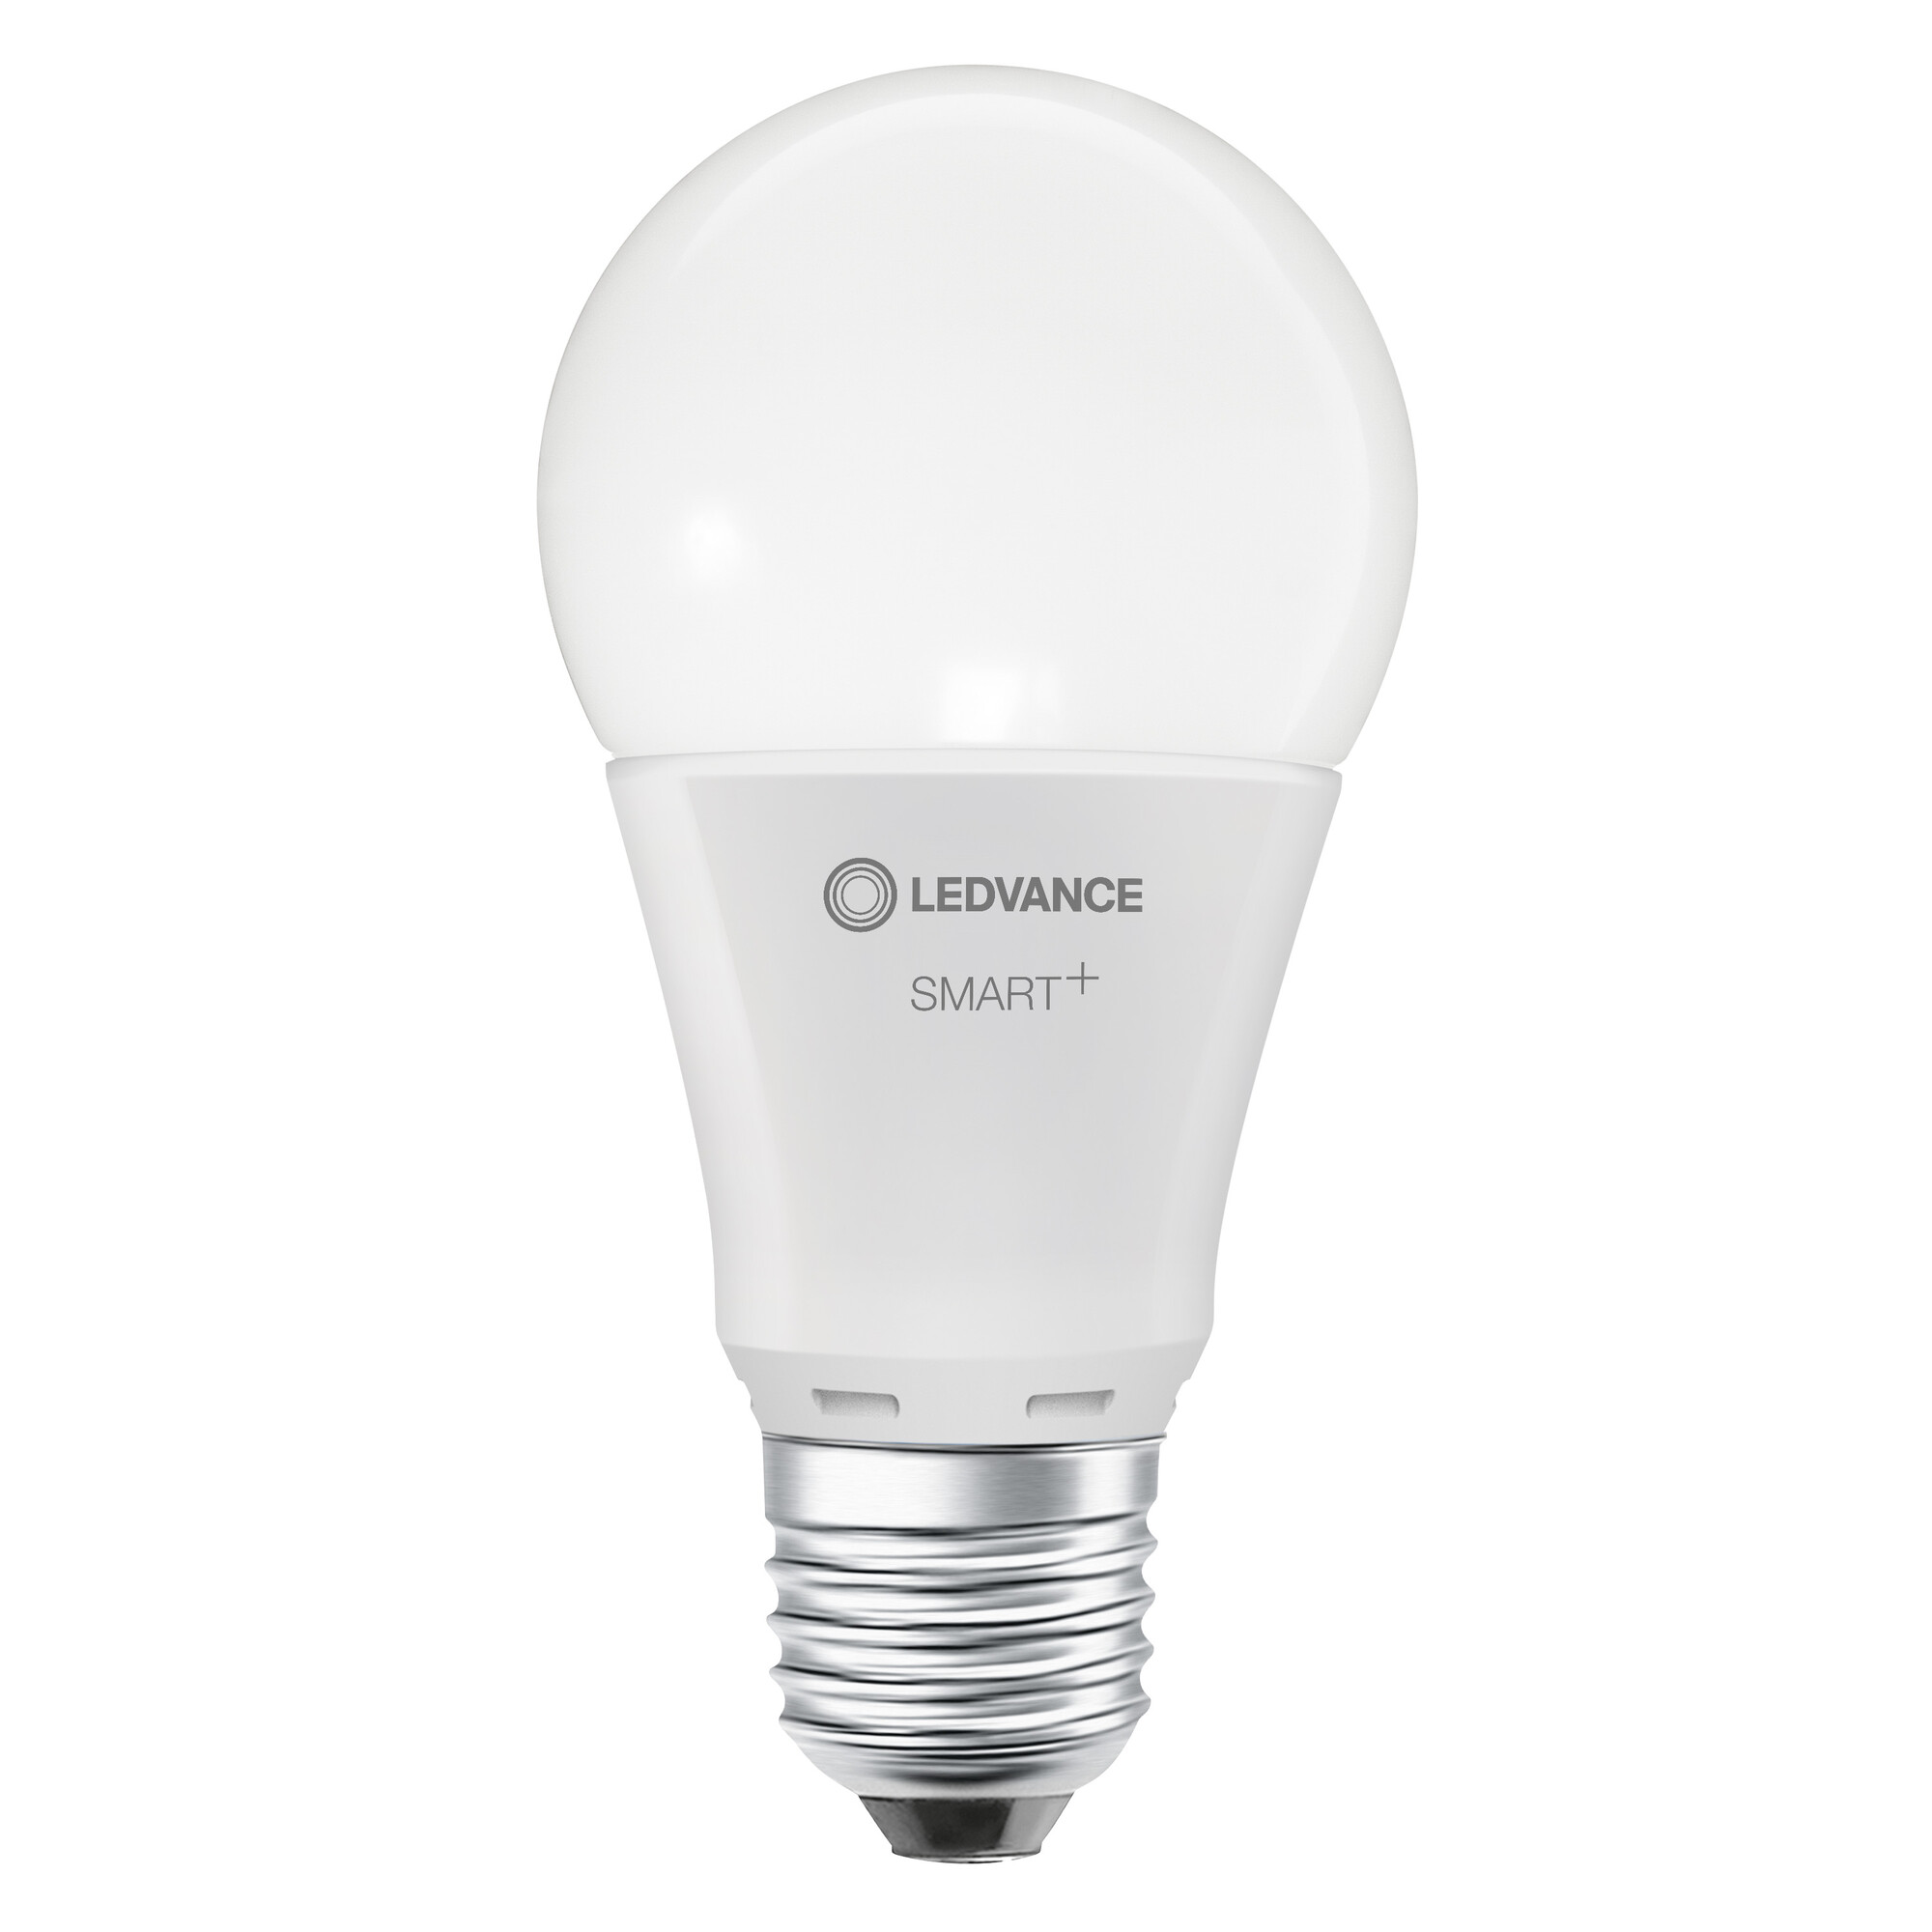 LED-Lampe 'Smart+ WiFi Classic' warmweiß 14 W E27 1521 lm dimmbar 3er-Pack + product picture